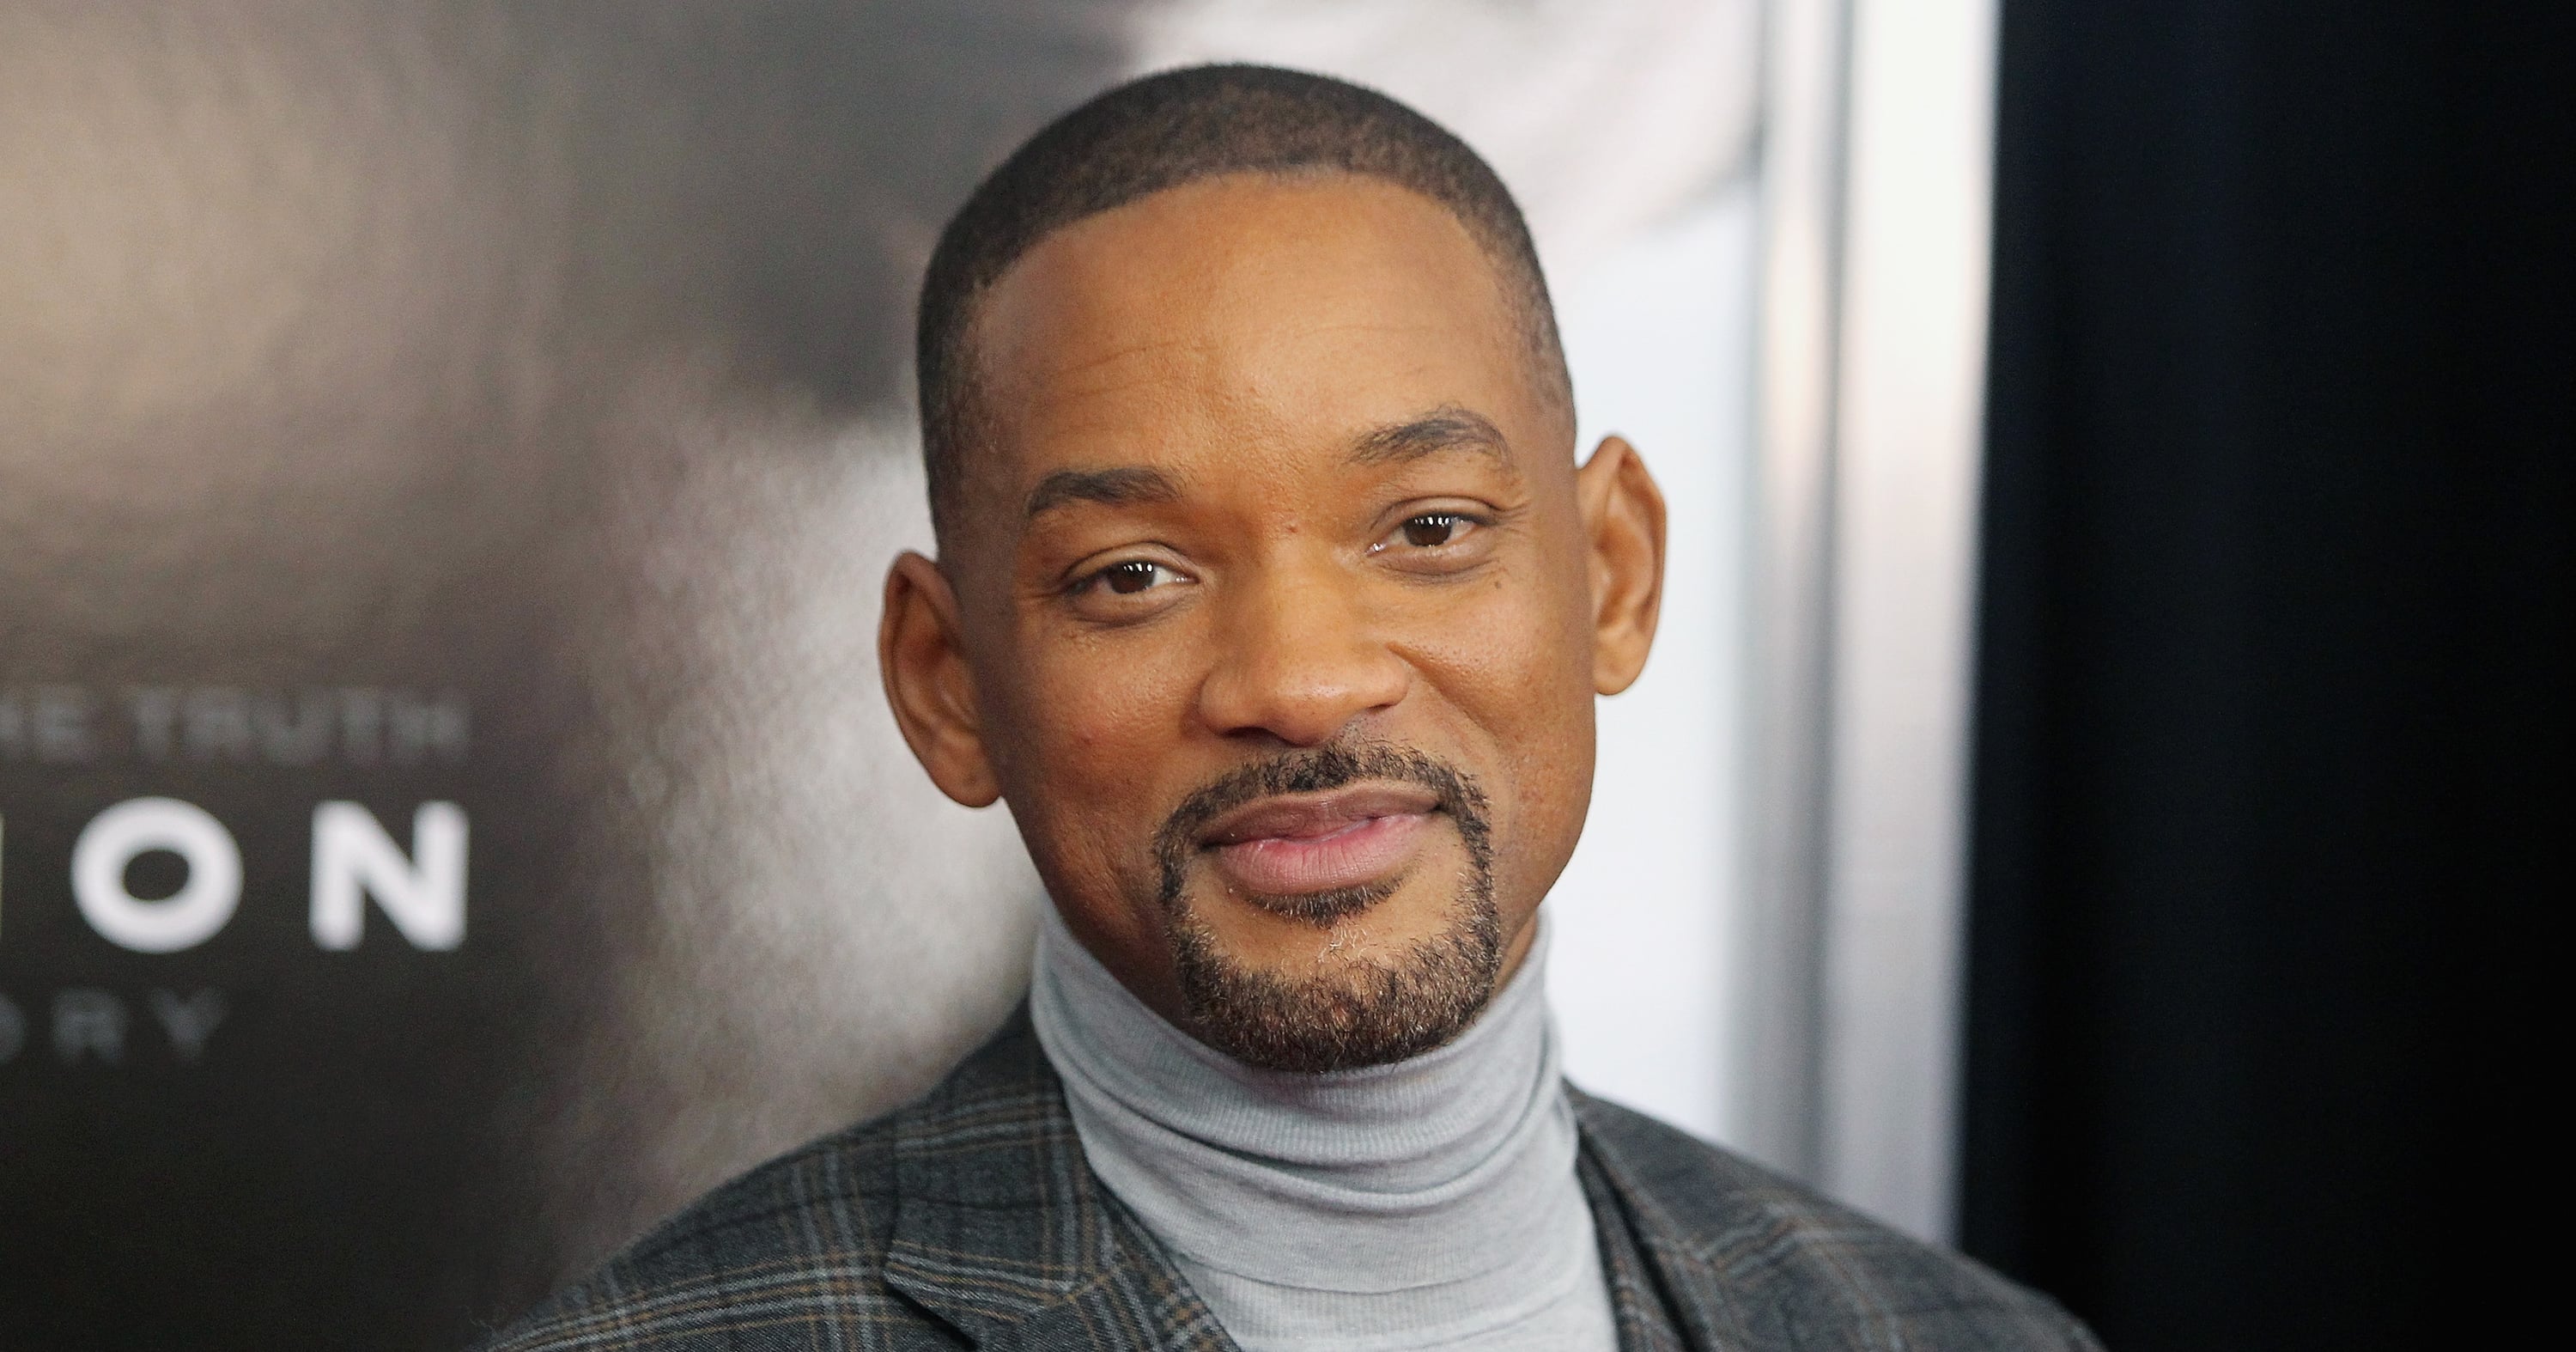 Who Is Will Smith Dating?